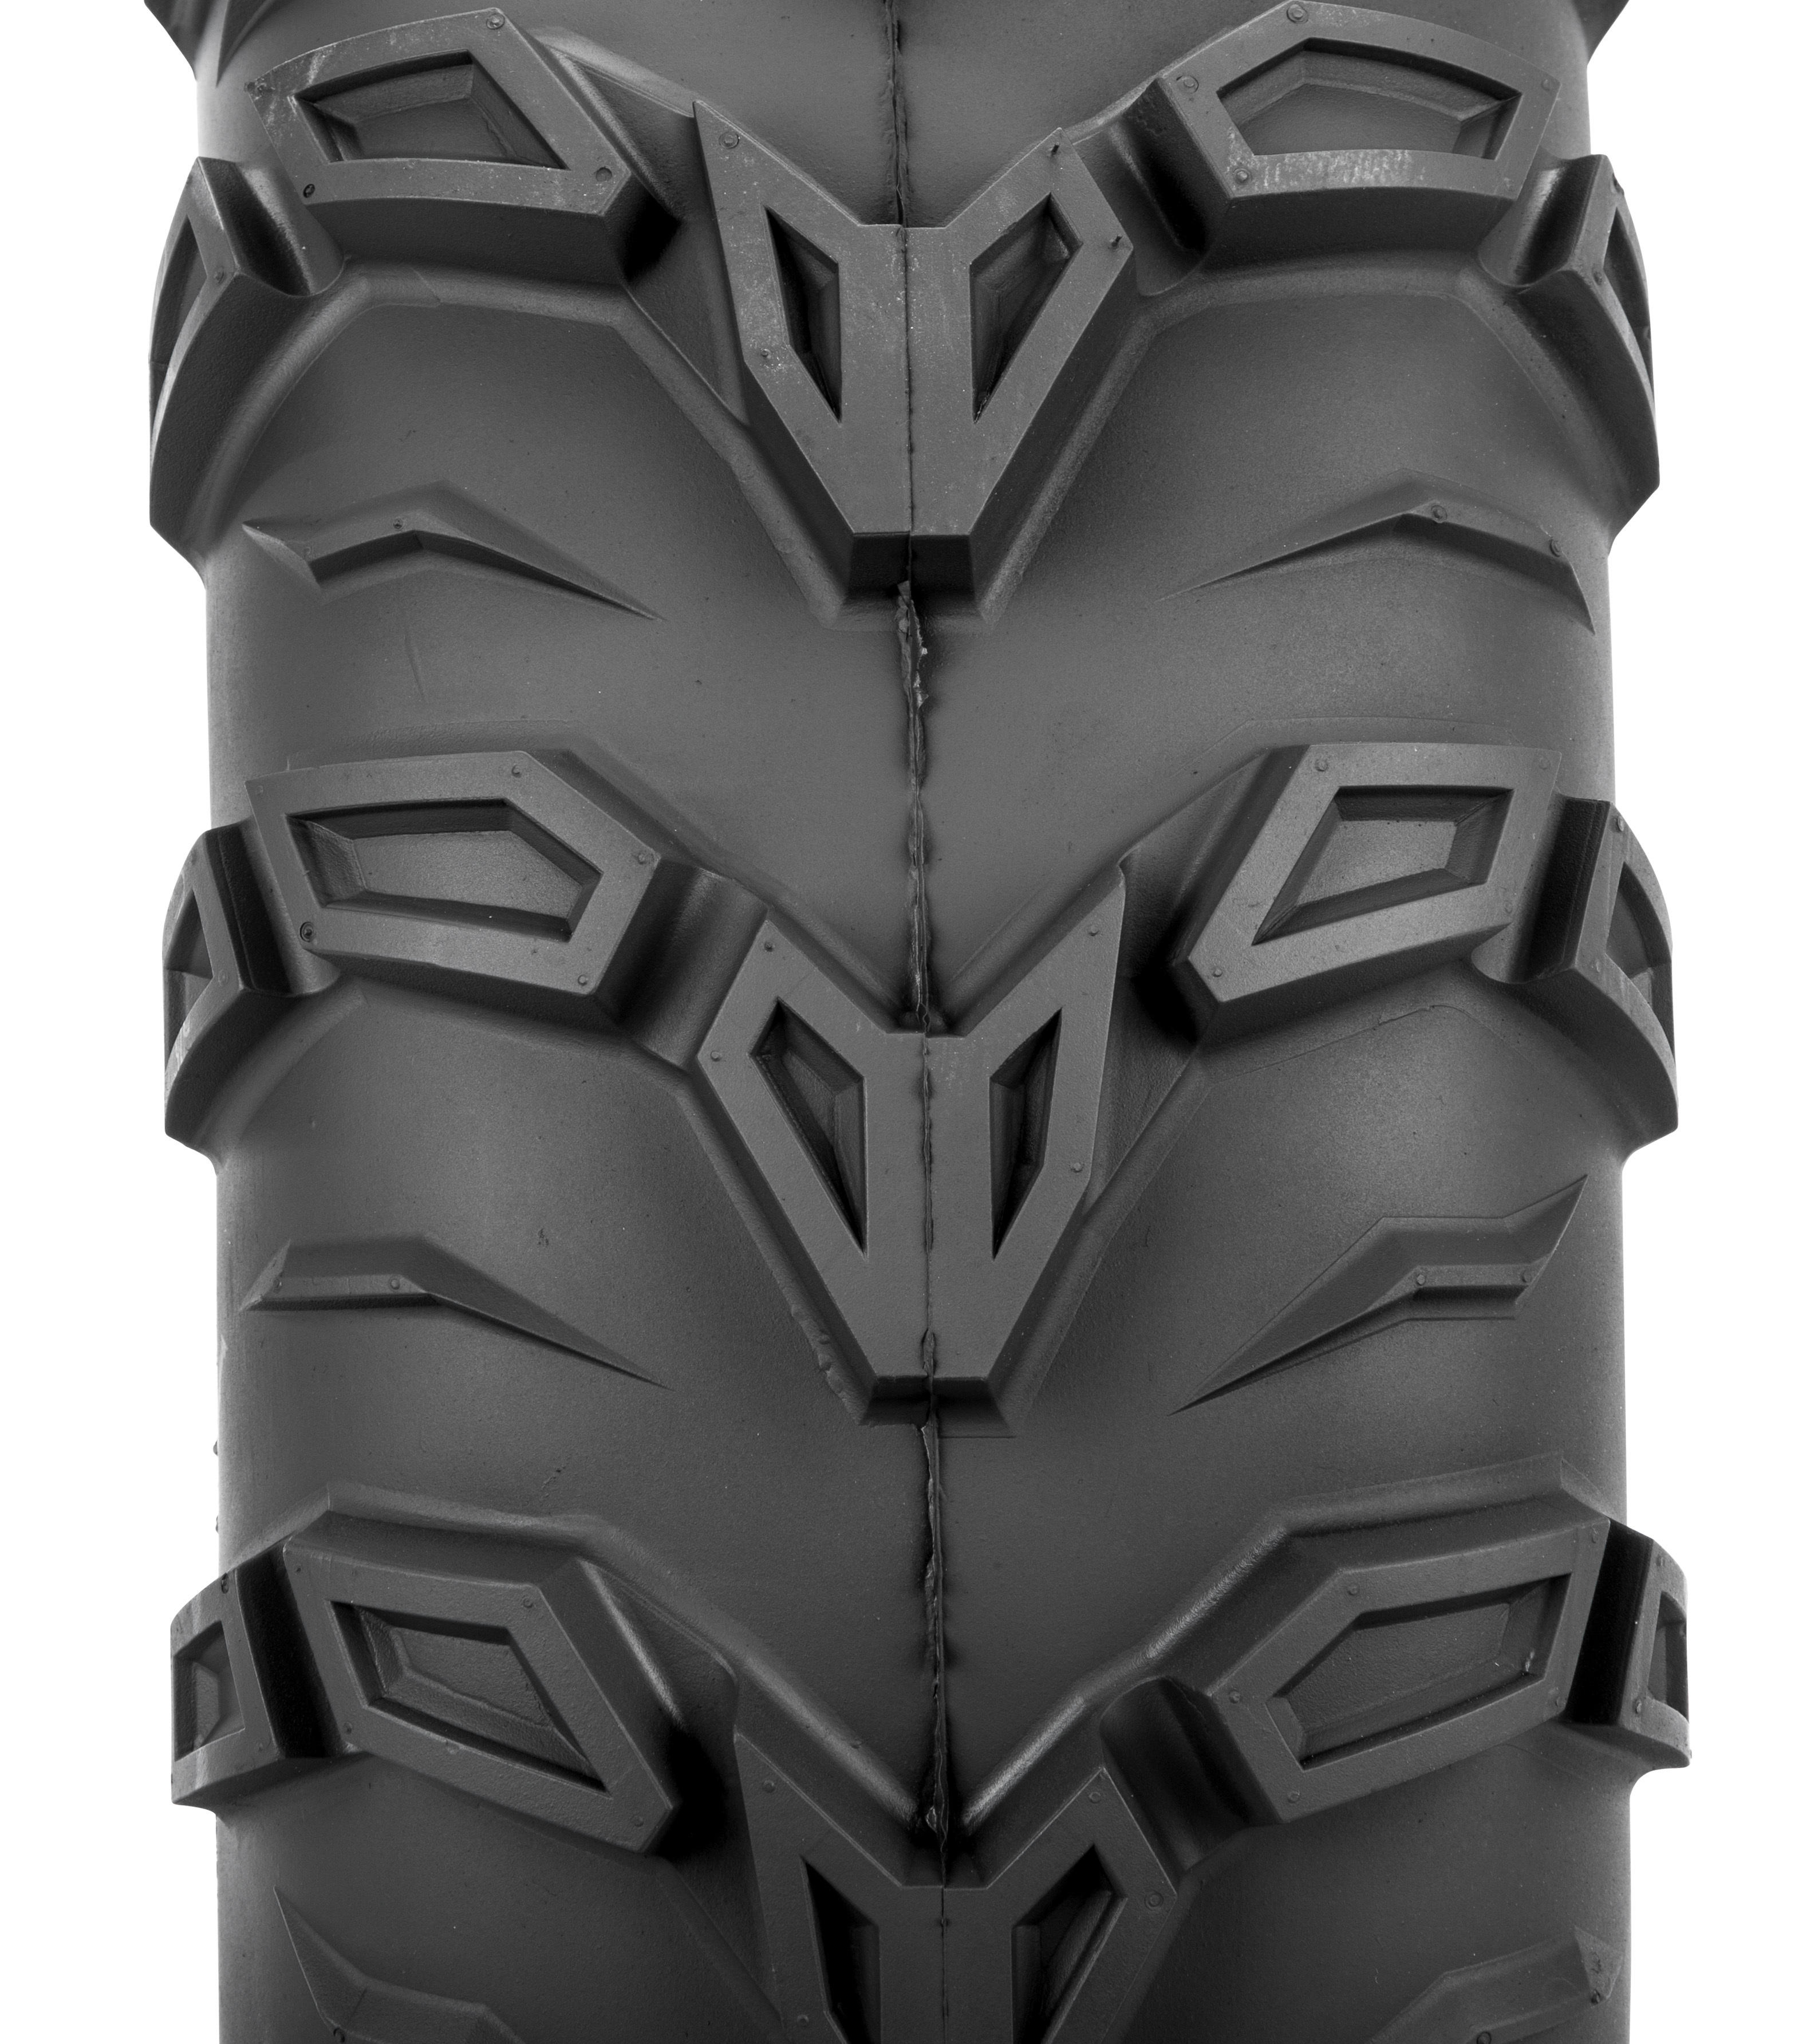 Mud Rebel Front Tire 26X9-12 6 PLY Bias - Click Image to Close